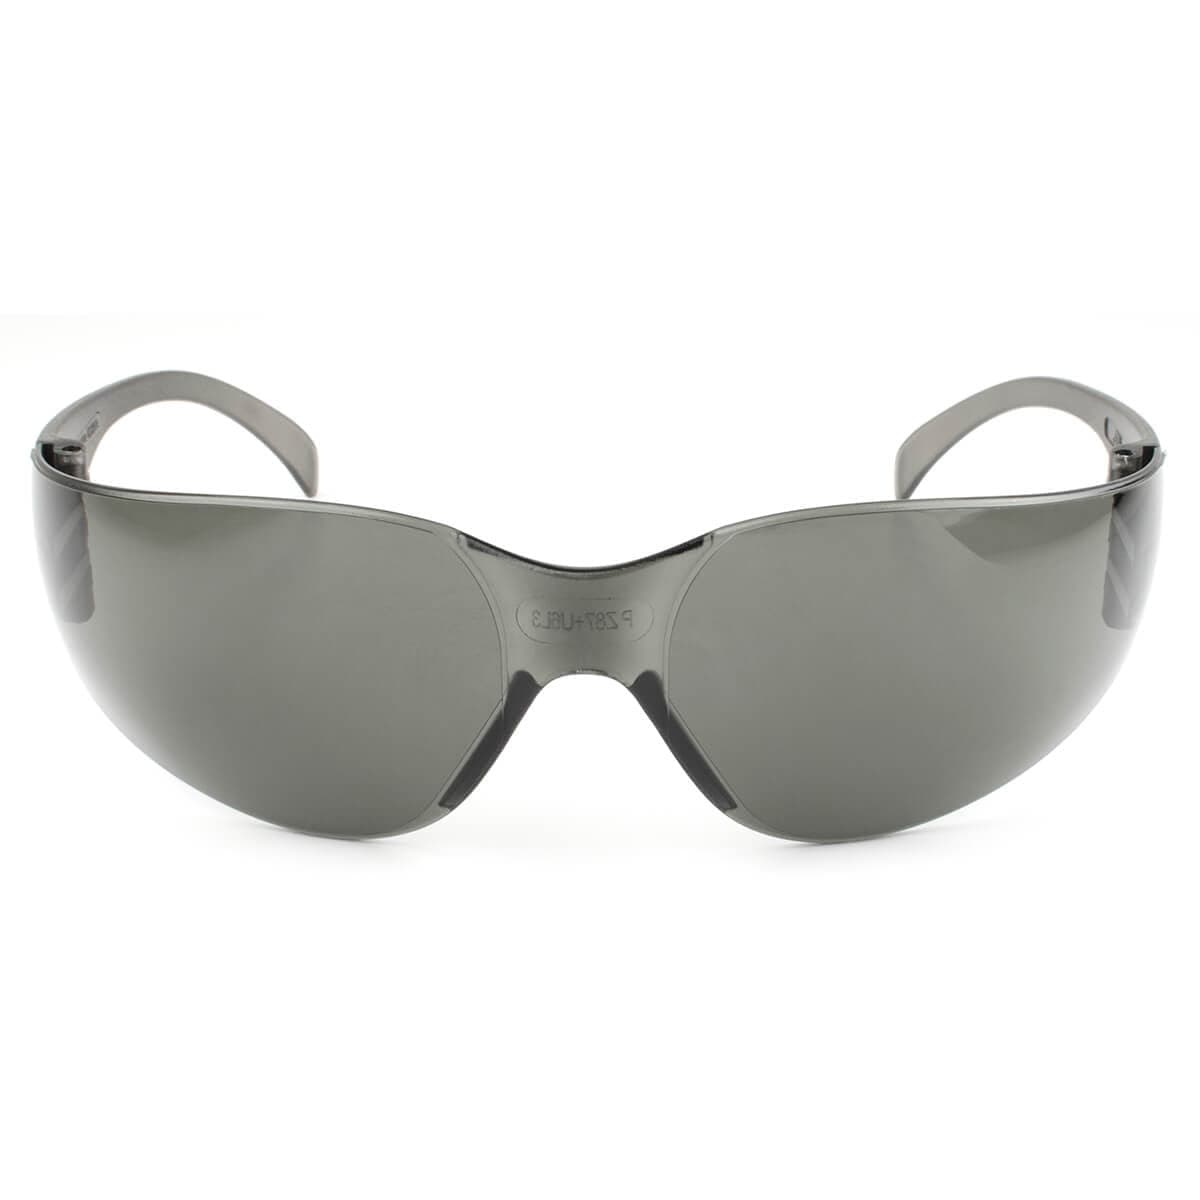 METEL M10 Safety Glasses with Gray Lenses Front View